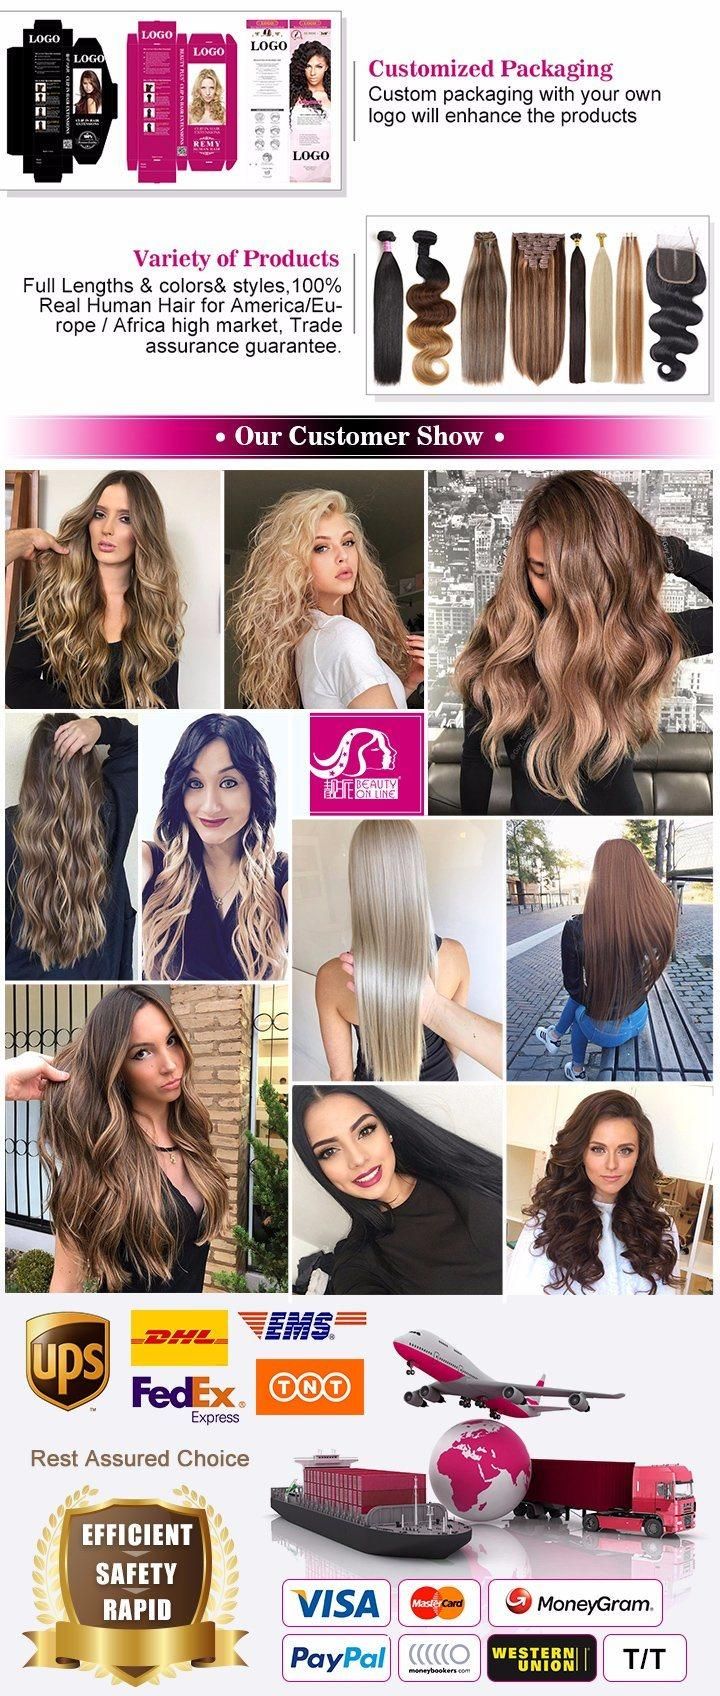 7A-10A Tape Hair Extensions 16" 18" 20" 22" 24" 20PCS/Set Tape in Remy Human Hair Skin Weft Brazilian Hair Extension